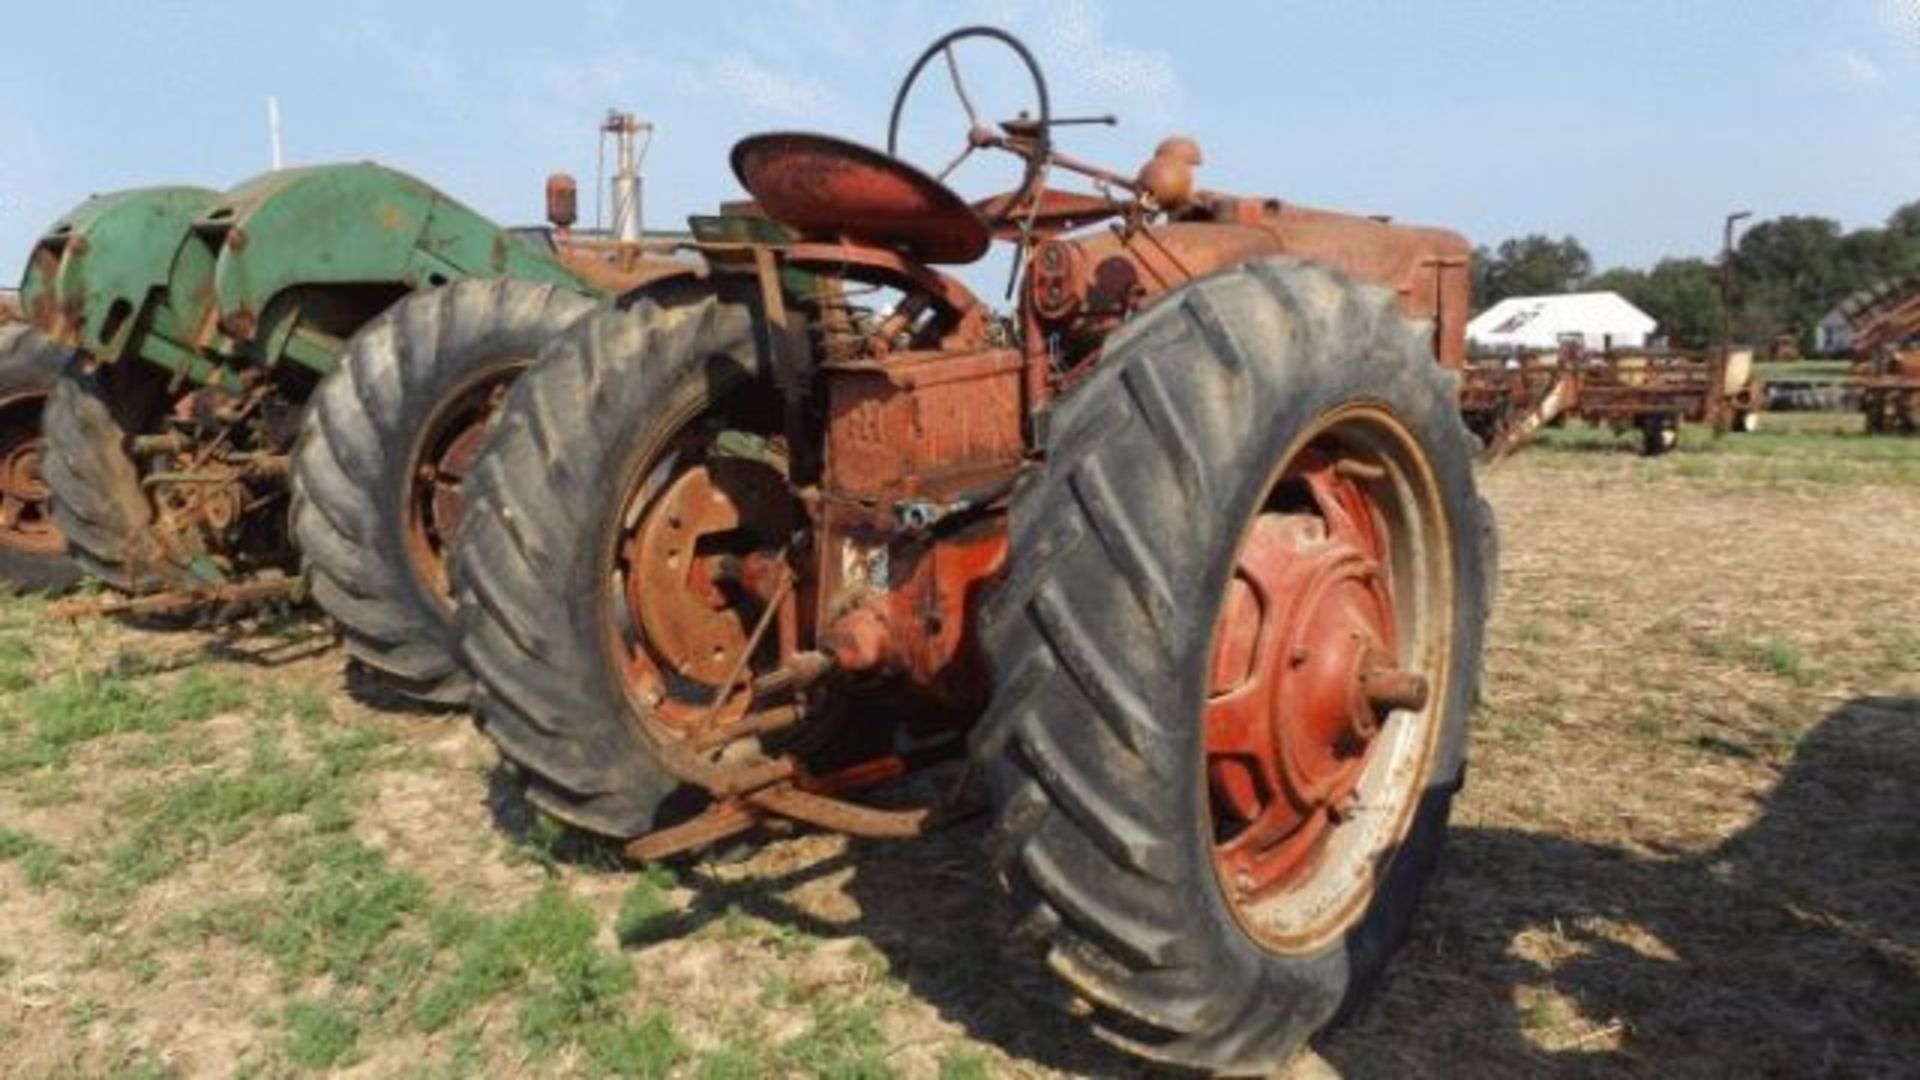 Lot 414 Farmall Super M Louisville Tractor, 1953 NF, PS, Rear Weights, Complete, Runs - Image 2 of 2